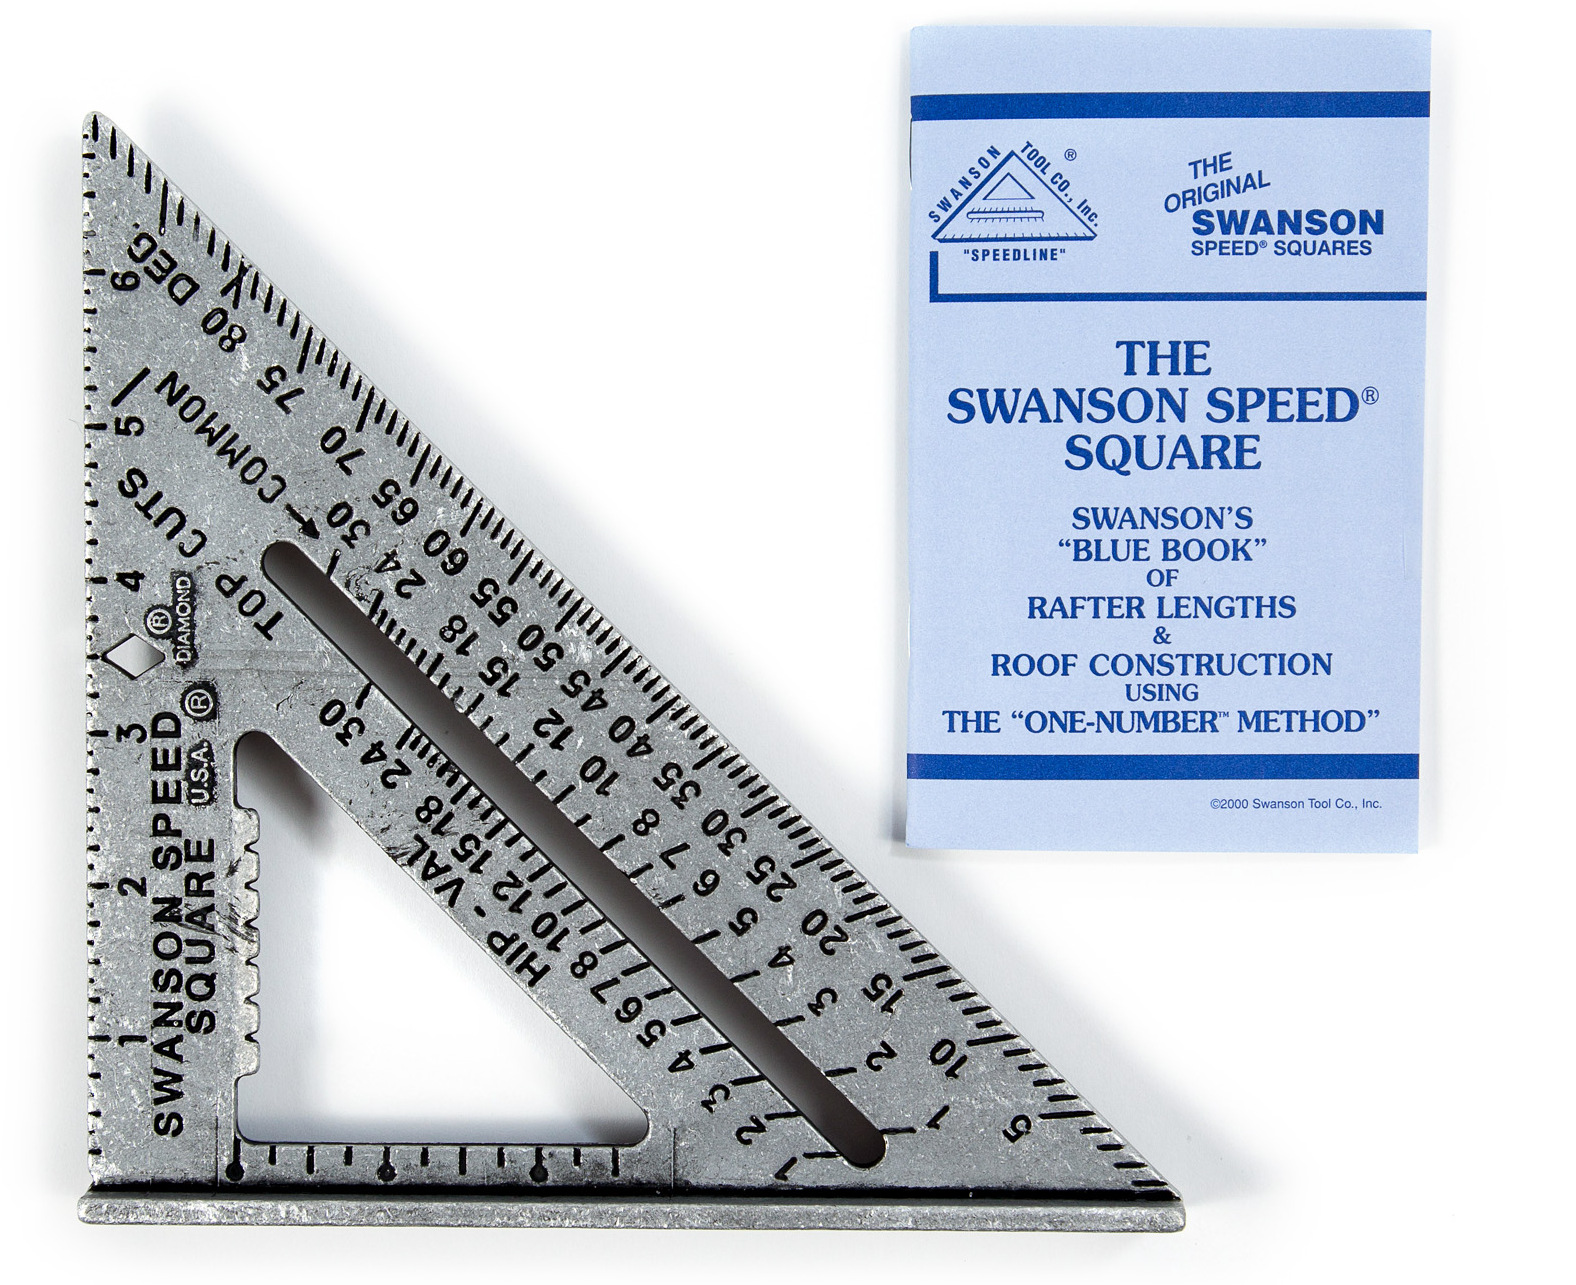 Swanson Tool 7 inch Aluminum Speed Square with Black Markings & Blue Book, Model S0101, Count Per Pack is 1 - image 2 of 9